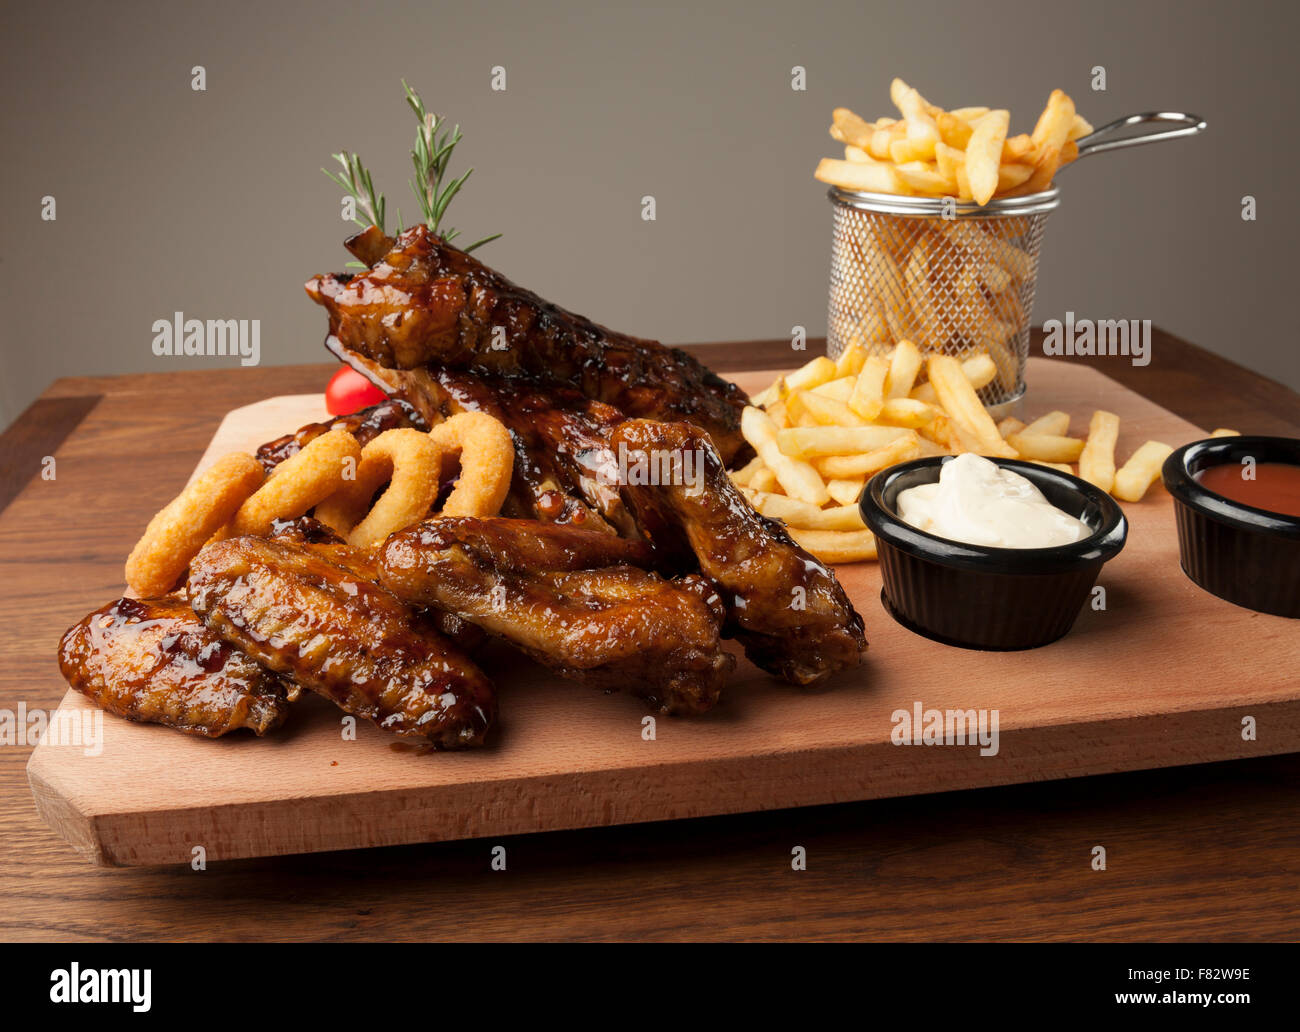 chicken wings and ribs with fries on wooden table Stock Photo